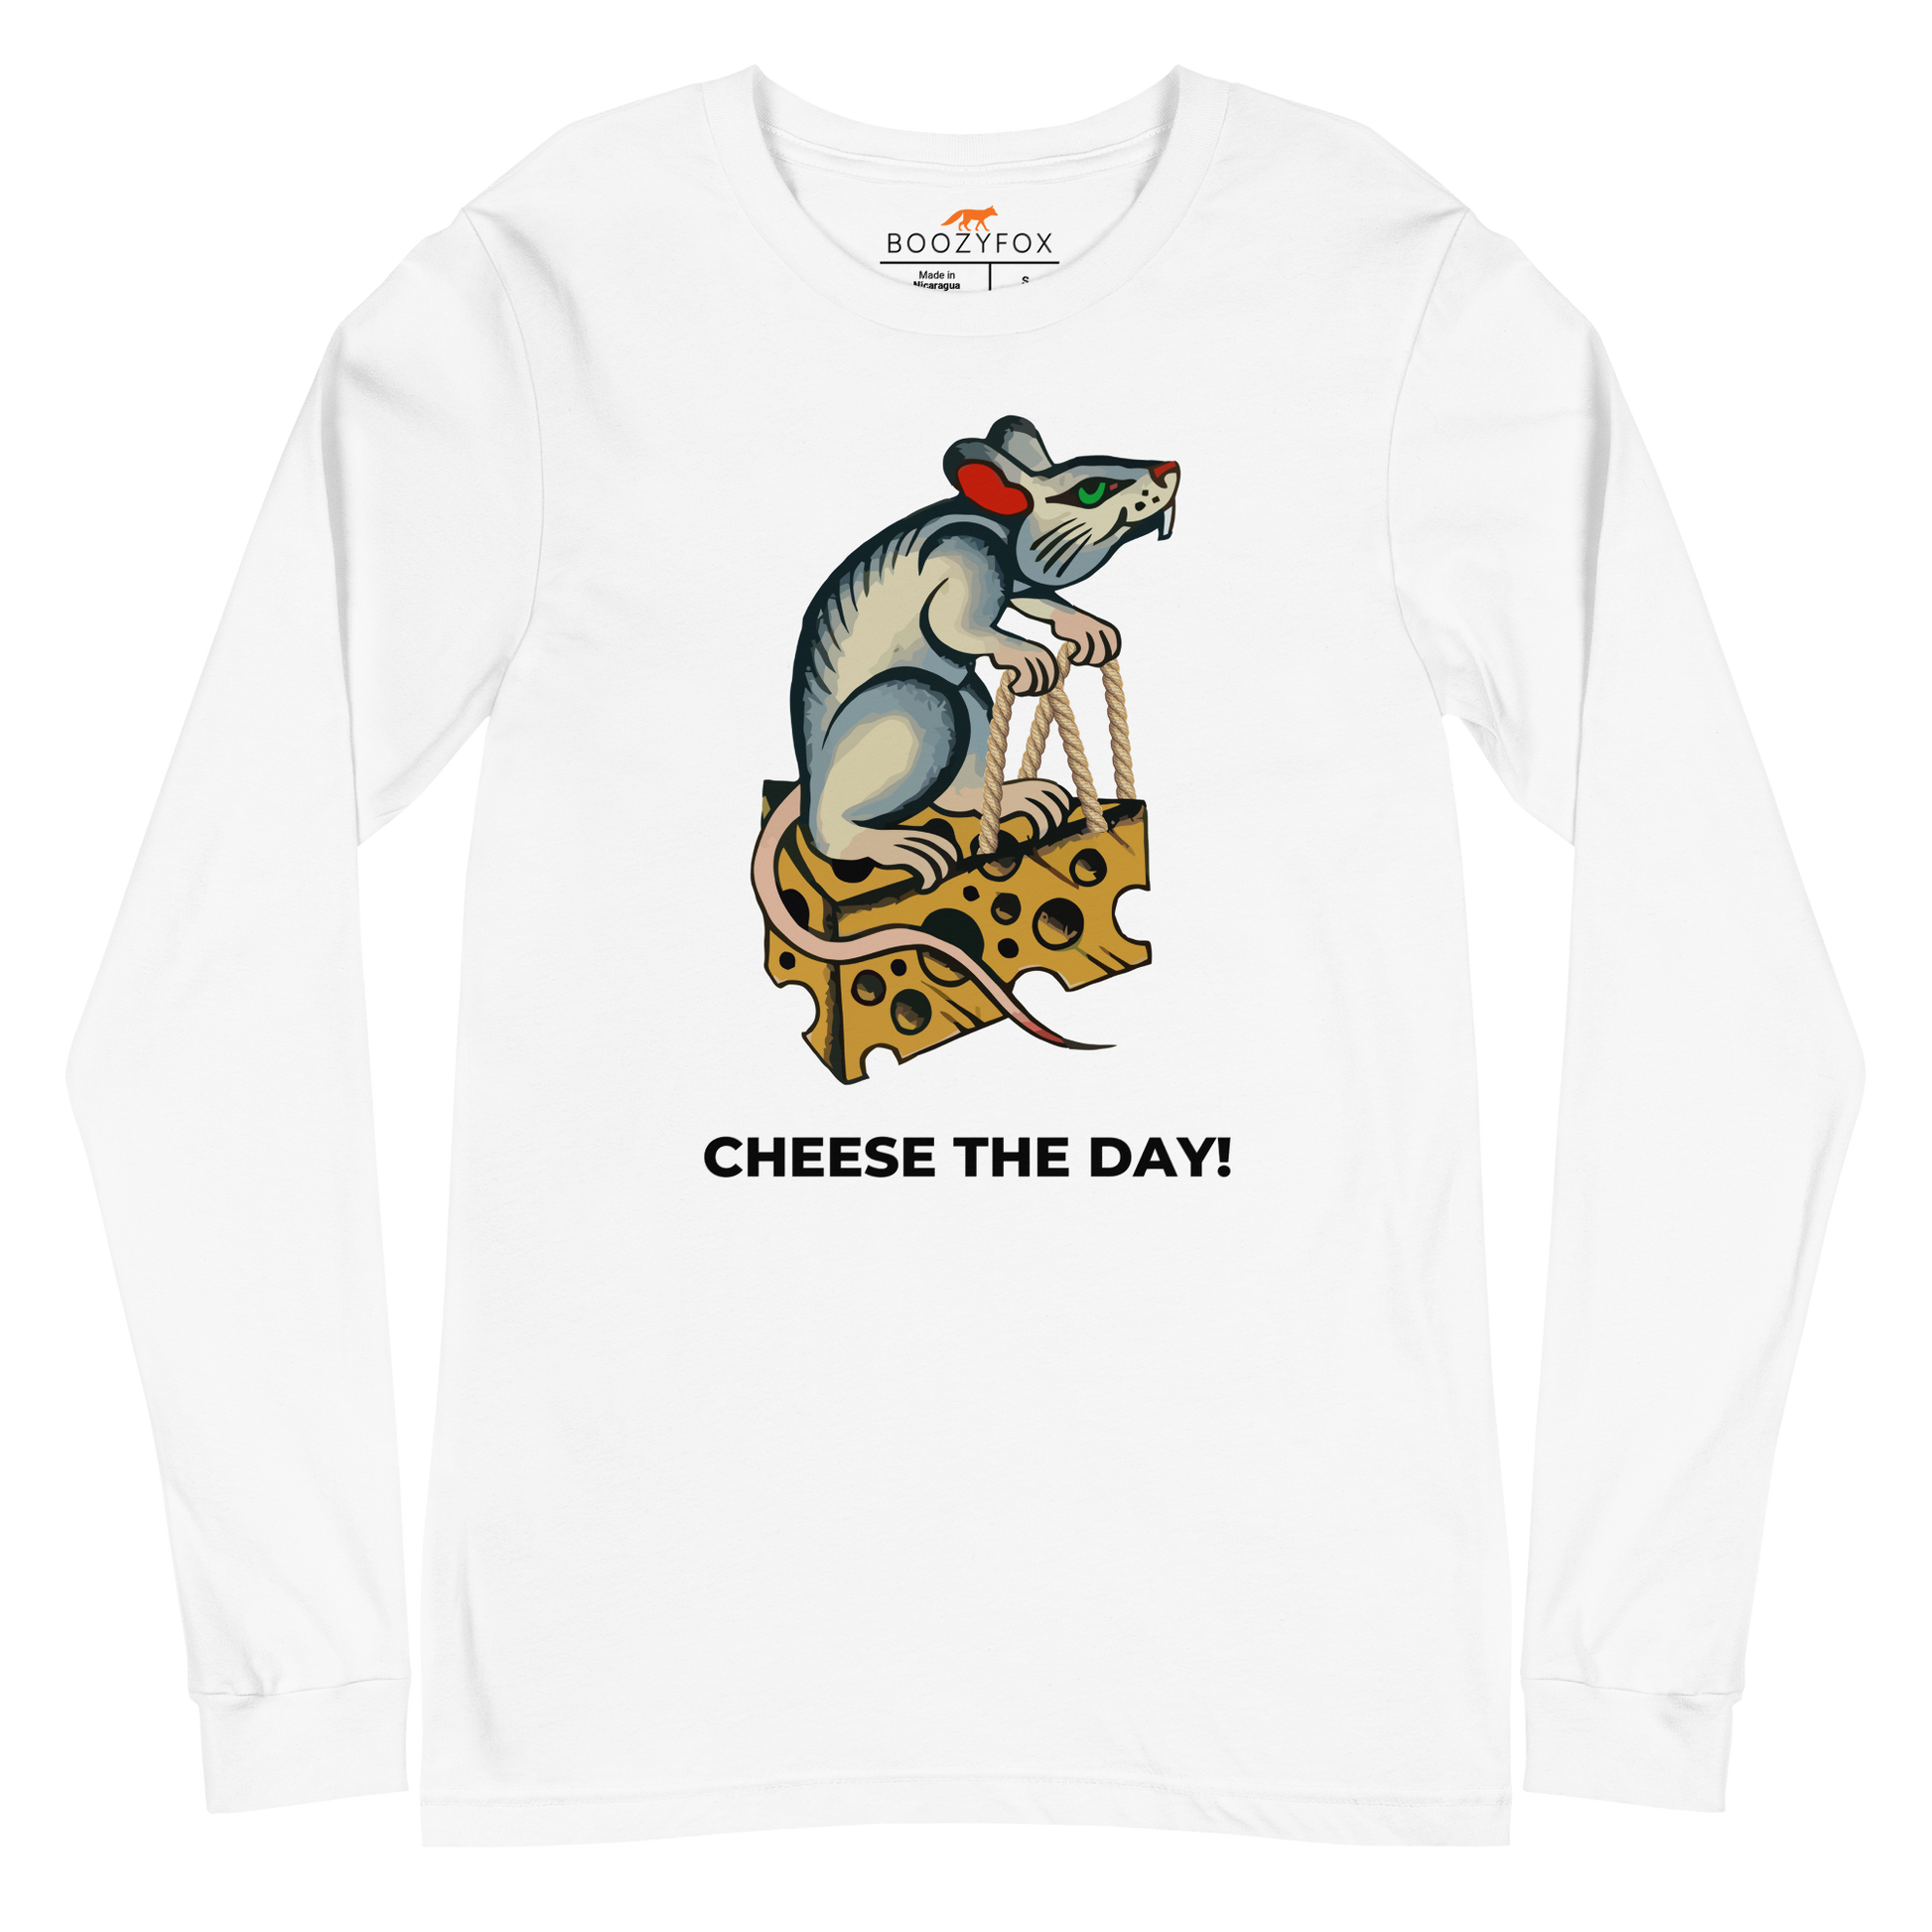 White Rat Long Sleeve Tee featuring a hilarious Cheese The Day graphic on the chest - Funny Rat Long Sleeve Graphic Tees - Boozy Fox